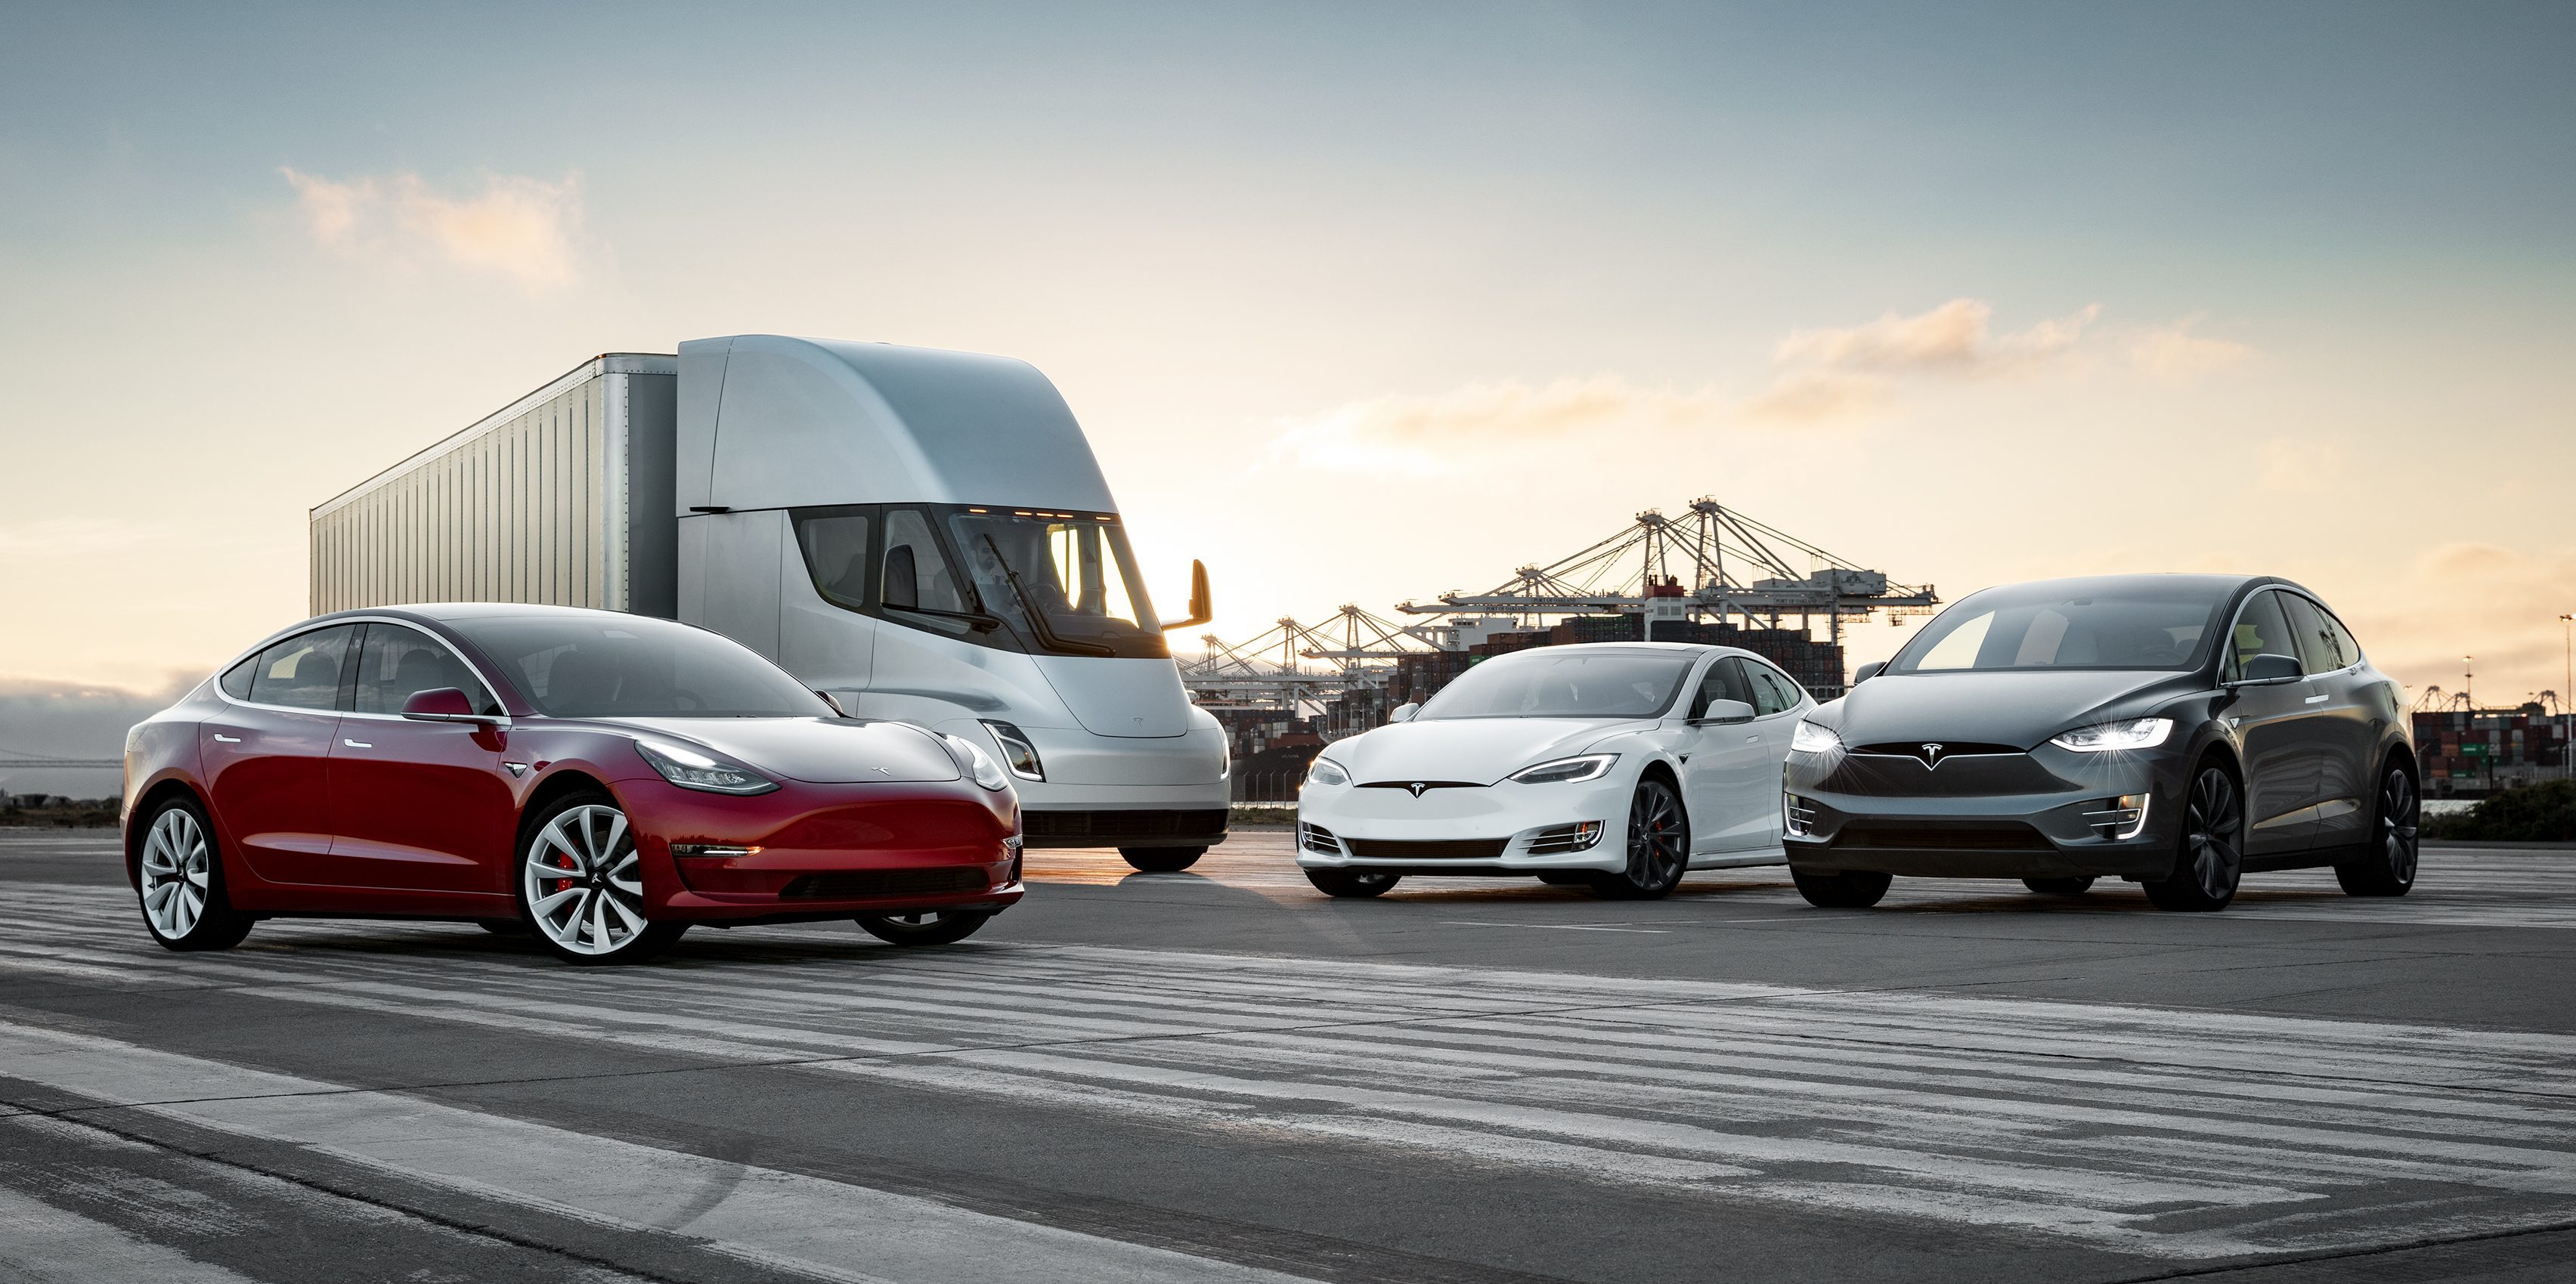 Kust boiler lunch What to expect from Tesla in 2019: Model Y, Model S/X refresh, and more -  Electrek